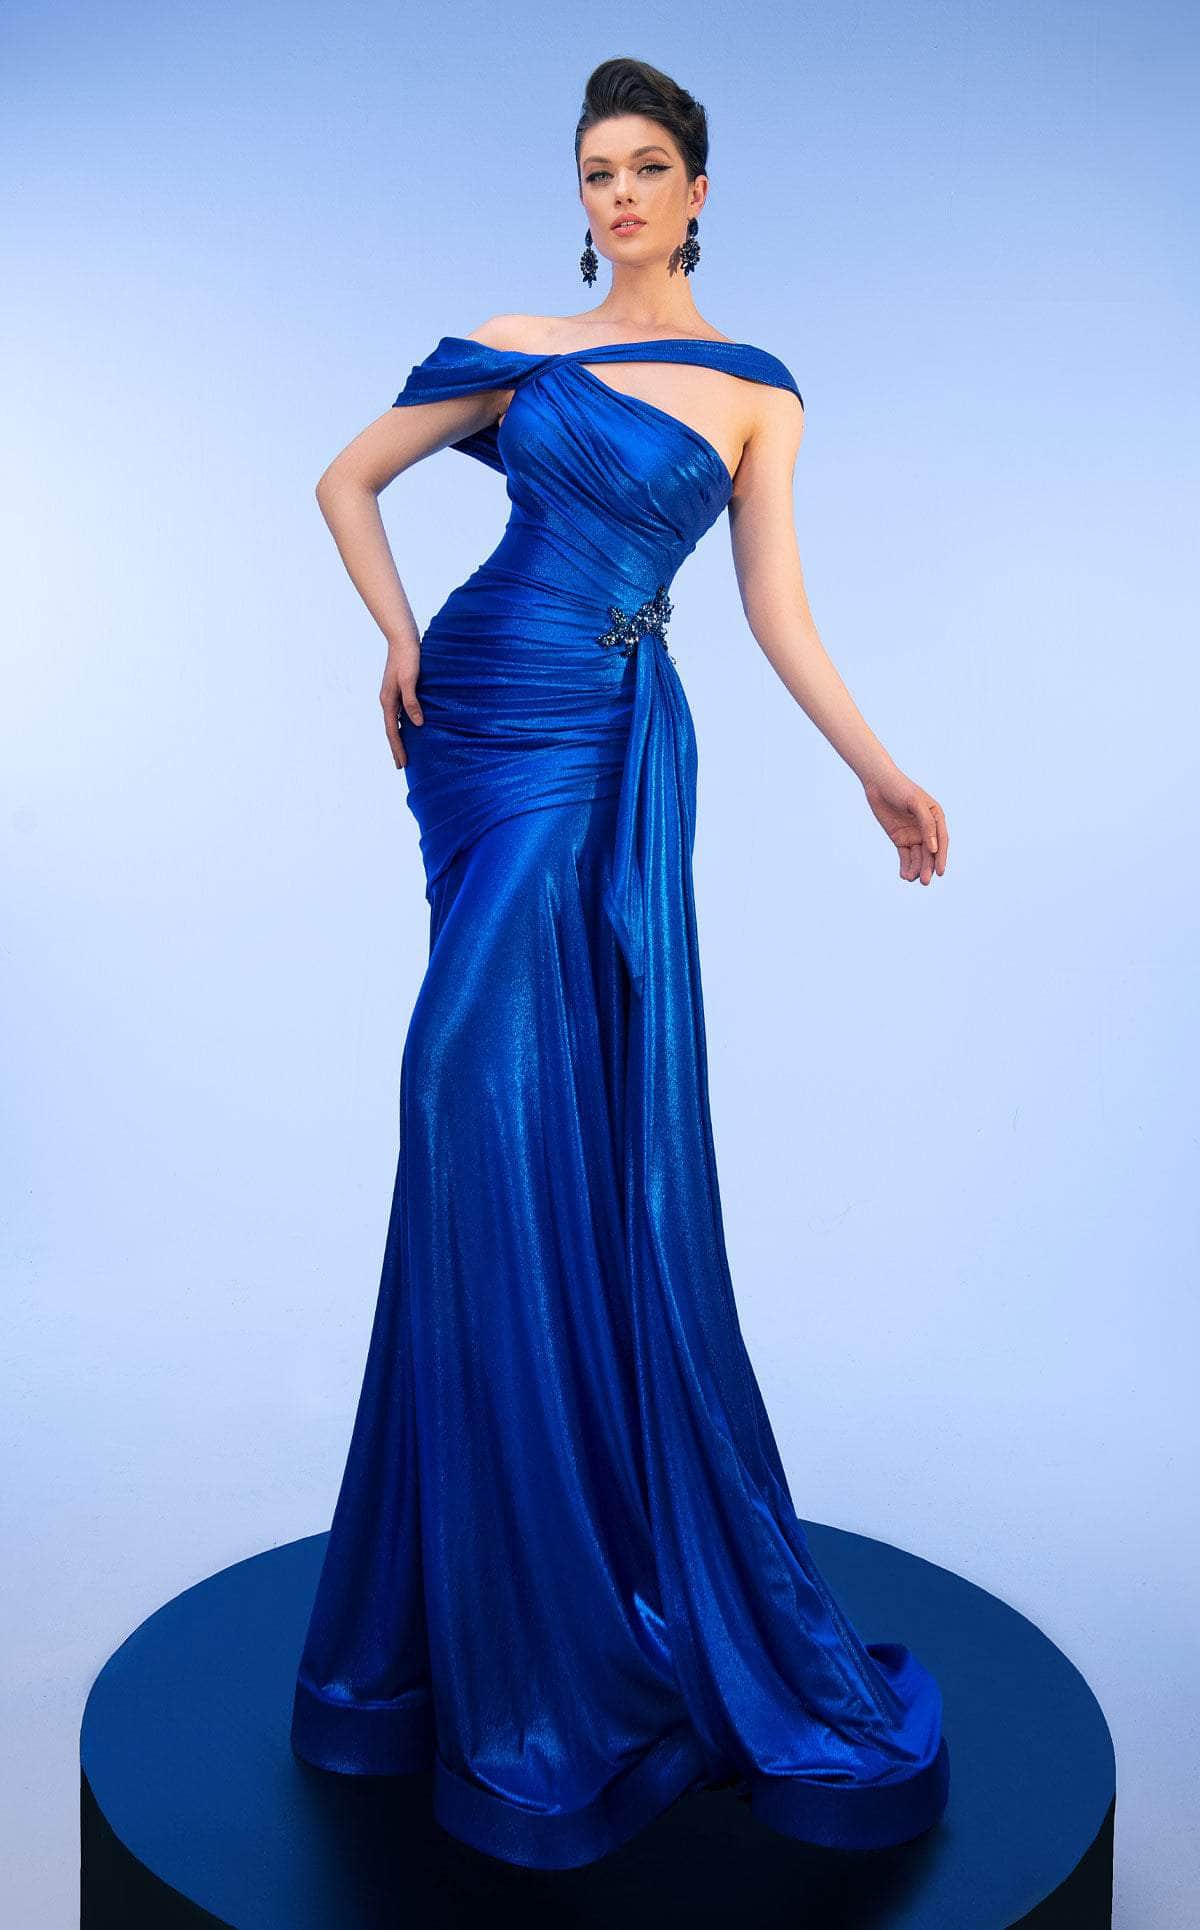 Image of MNM Couture 2792 - Asymmetric Metallic Crepe Gown